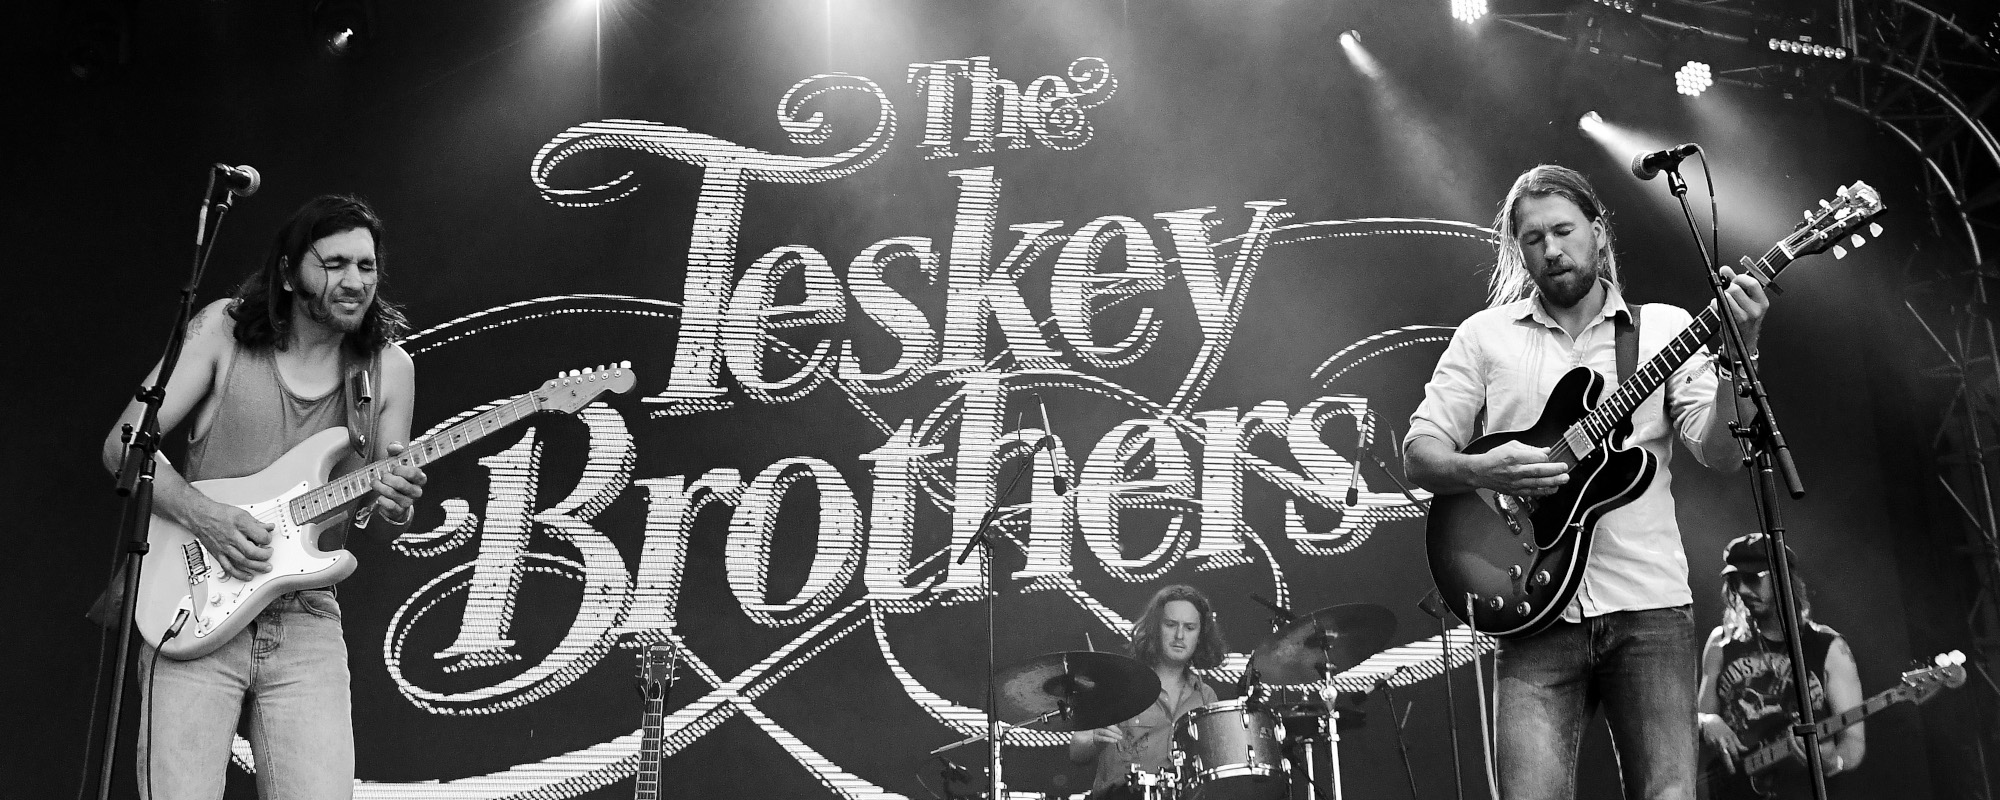 Review: The Teskey Brothers Exude Pure, Potent Soul on ‘The Winding Way’